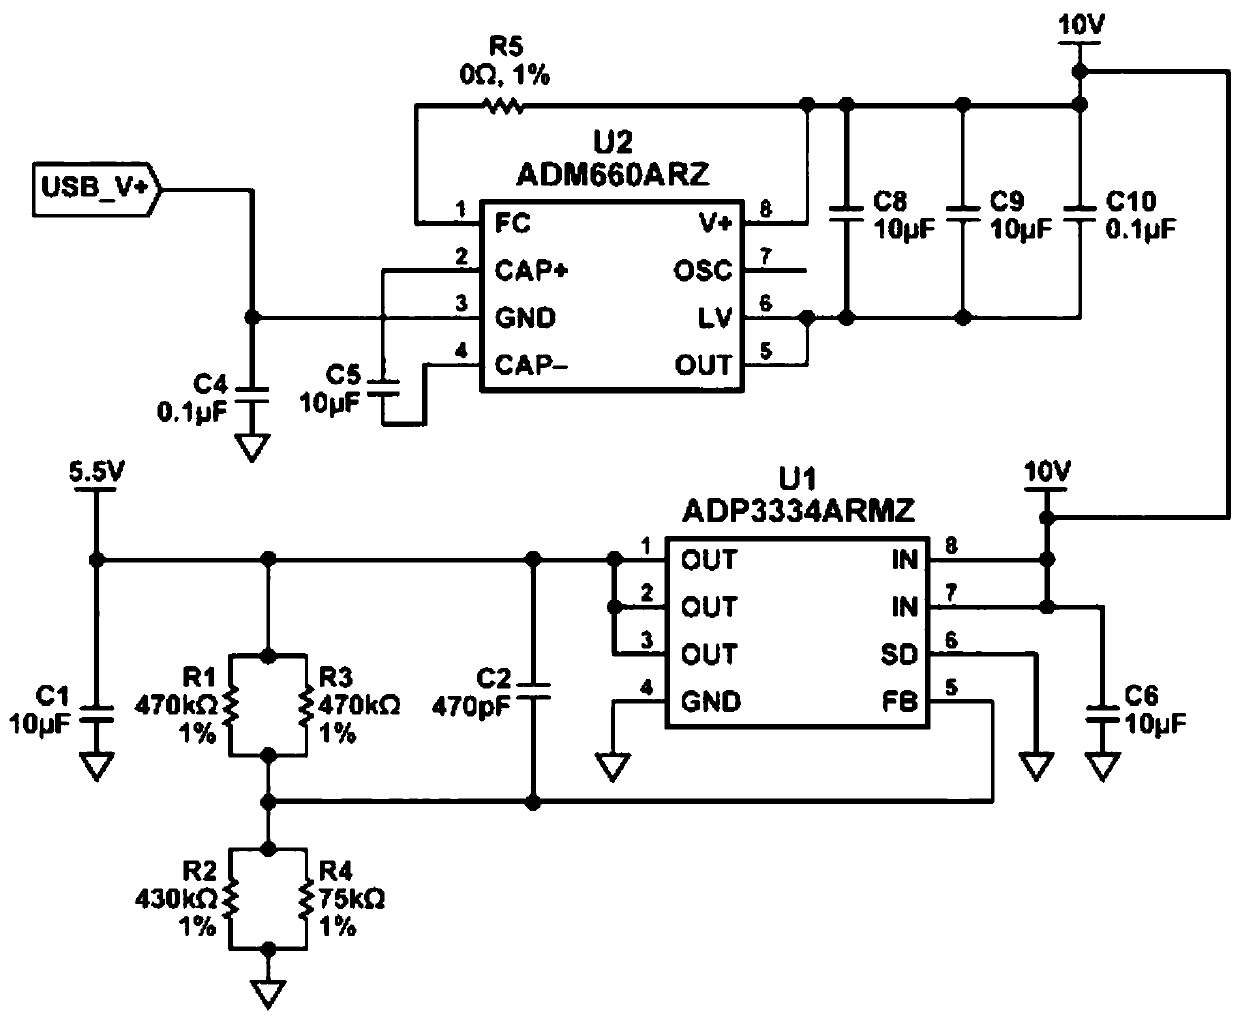 Live broadcast sound card voltage output control method and structure